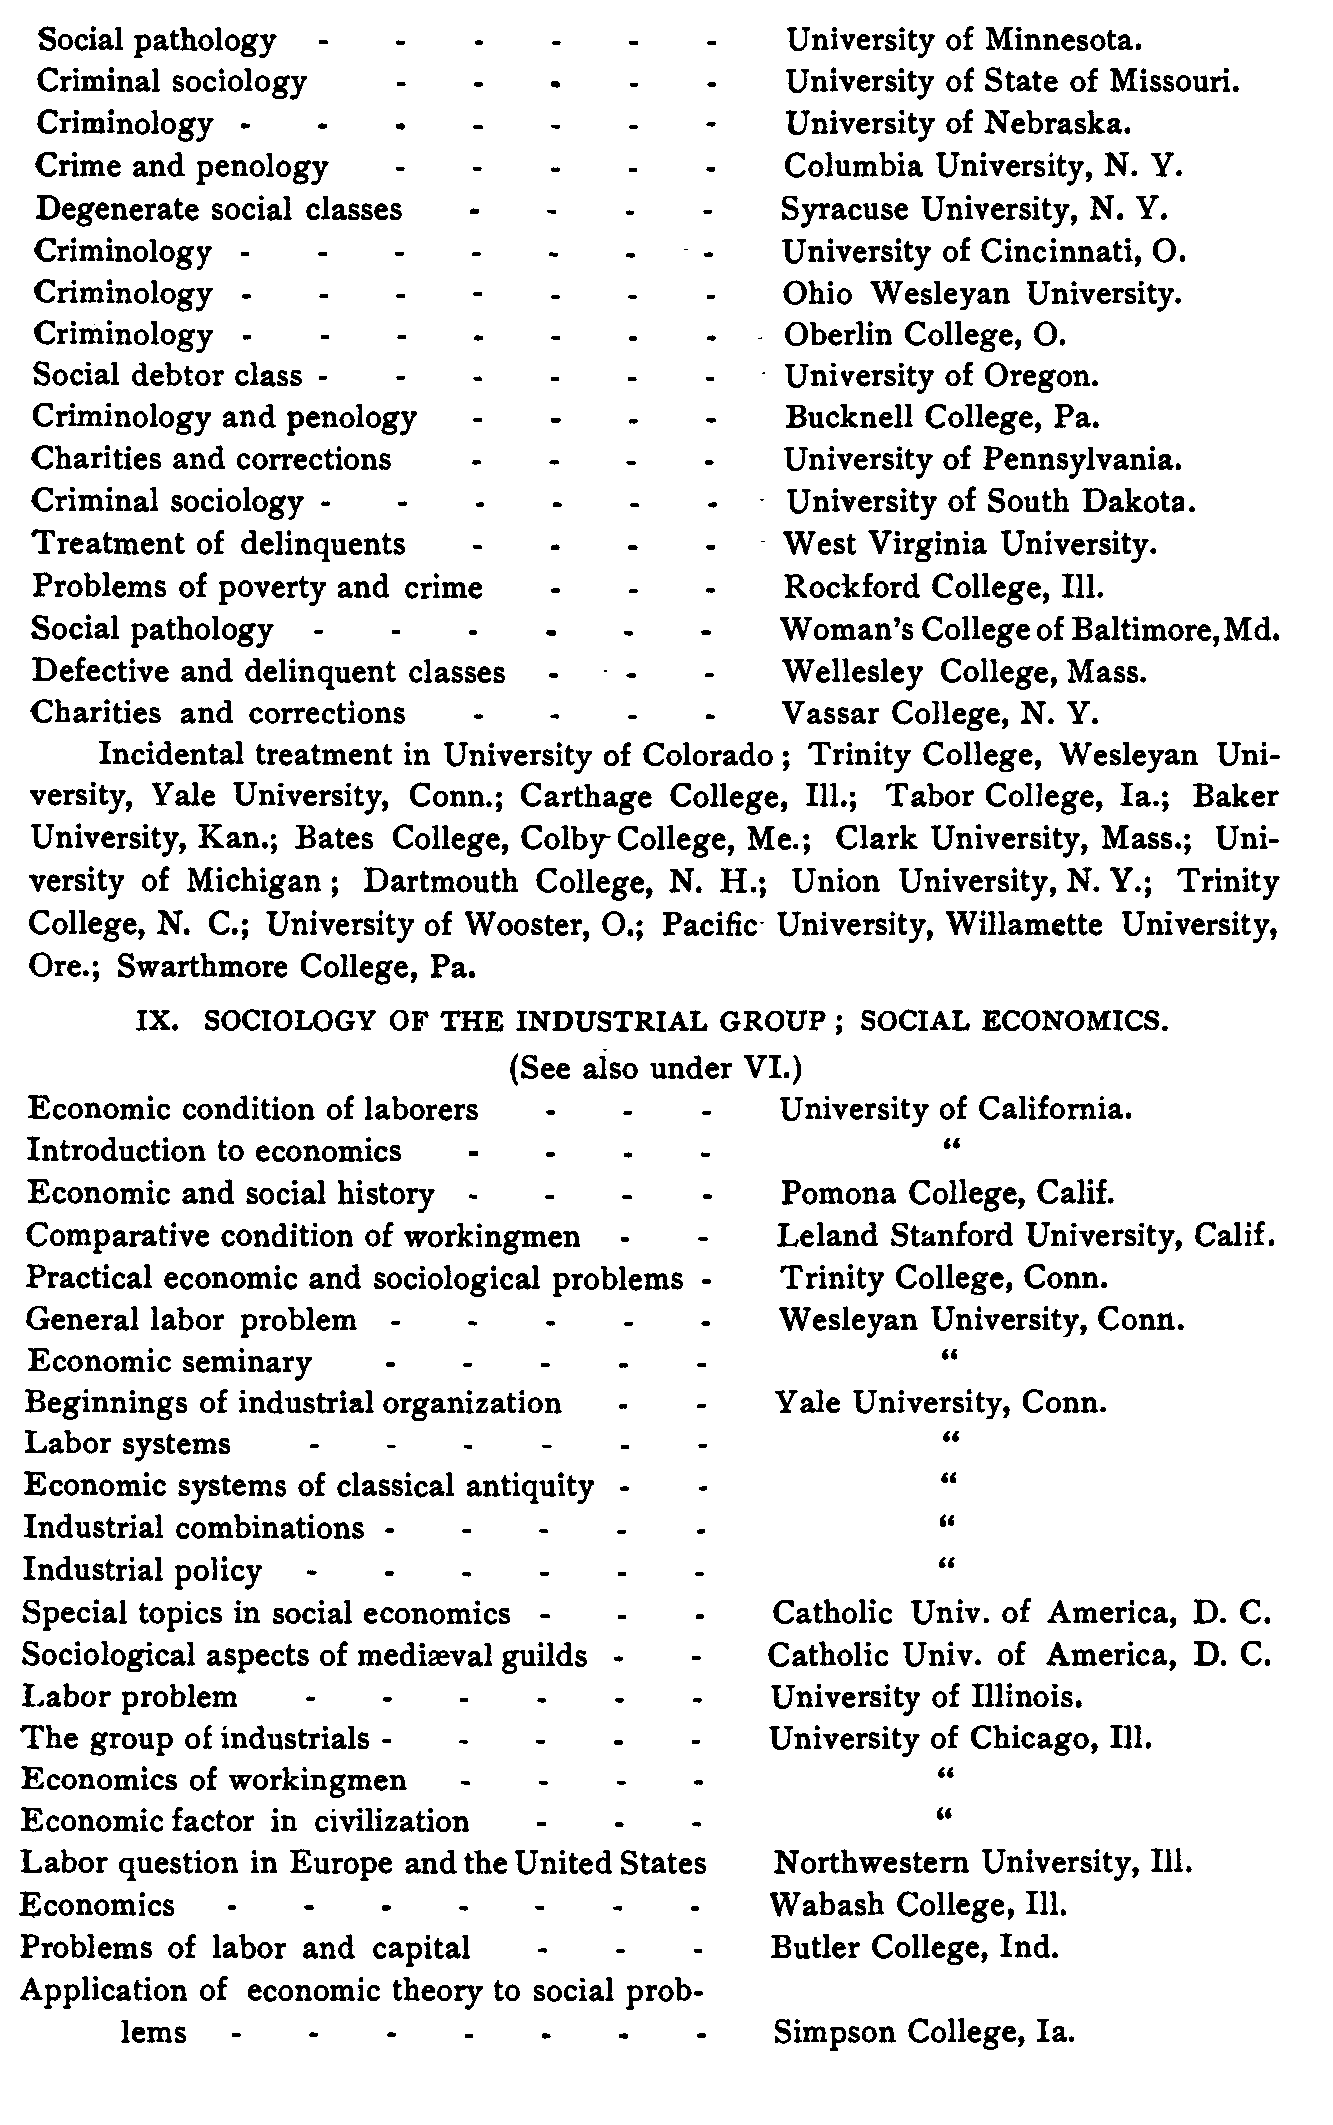 Classified Lists of Courses in sociology